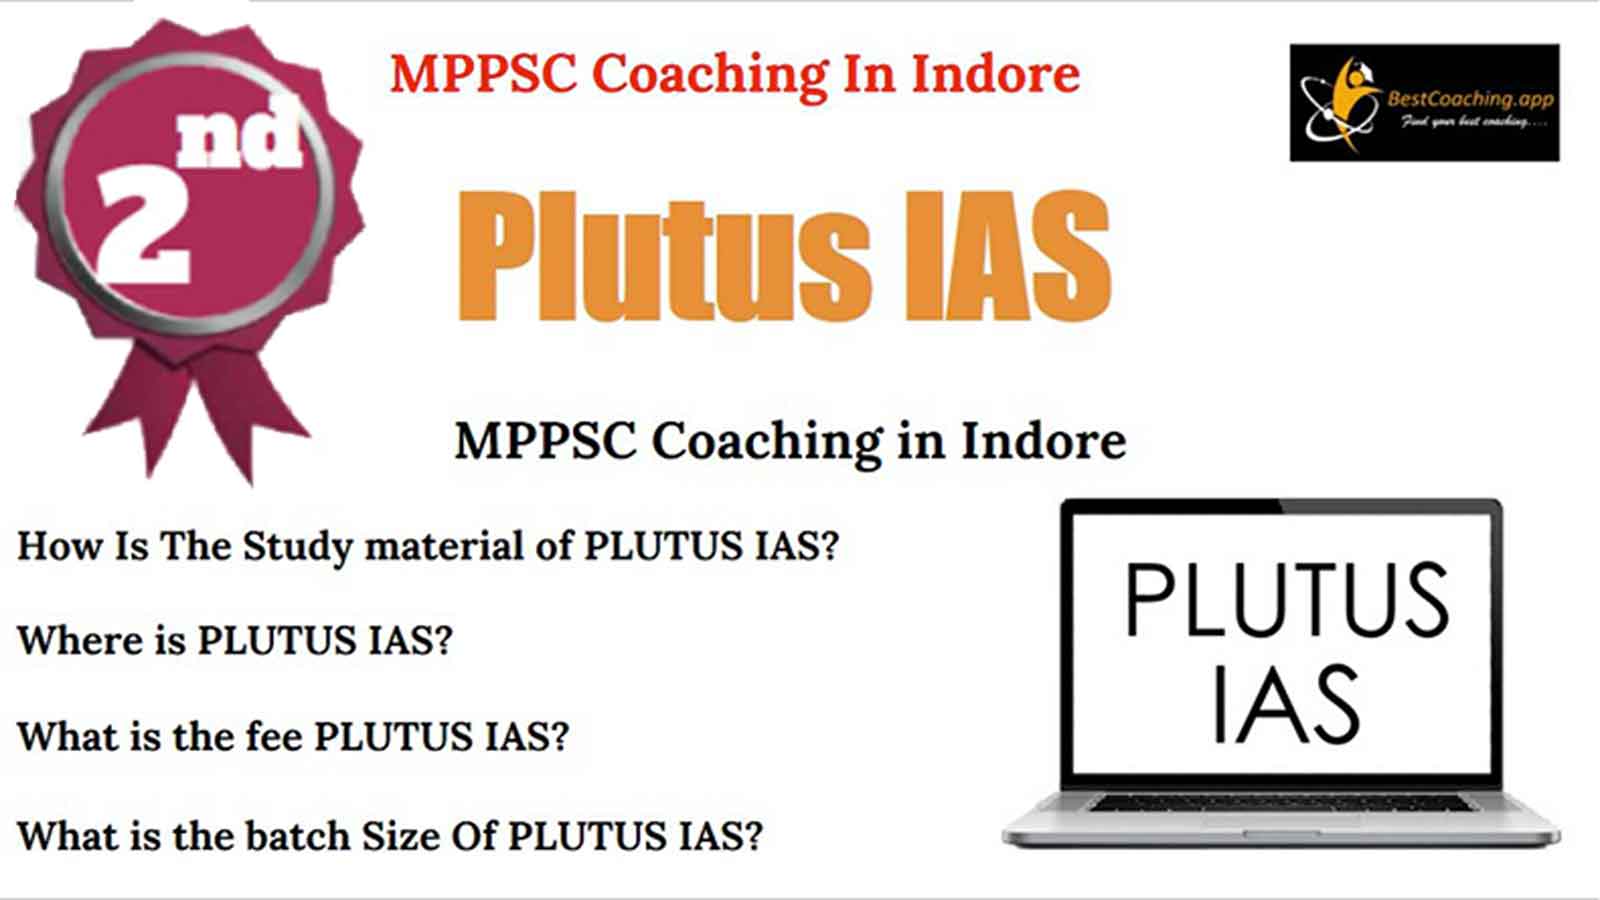 2nd Top MPPSC Coaching in Indore 2022